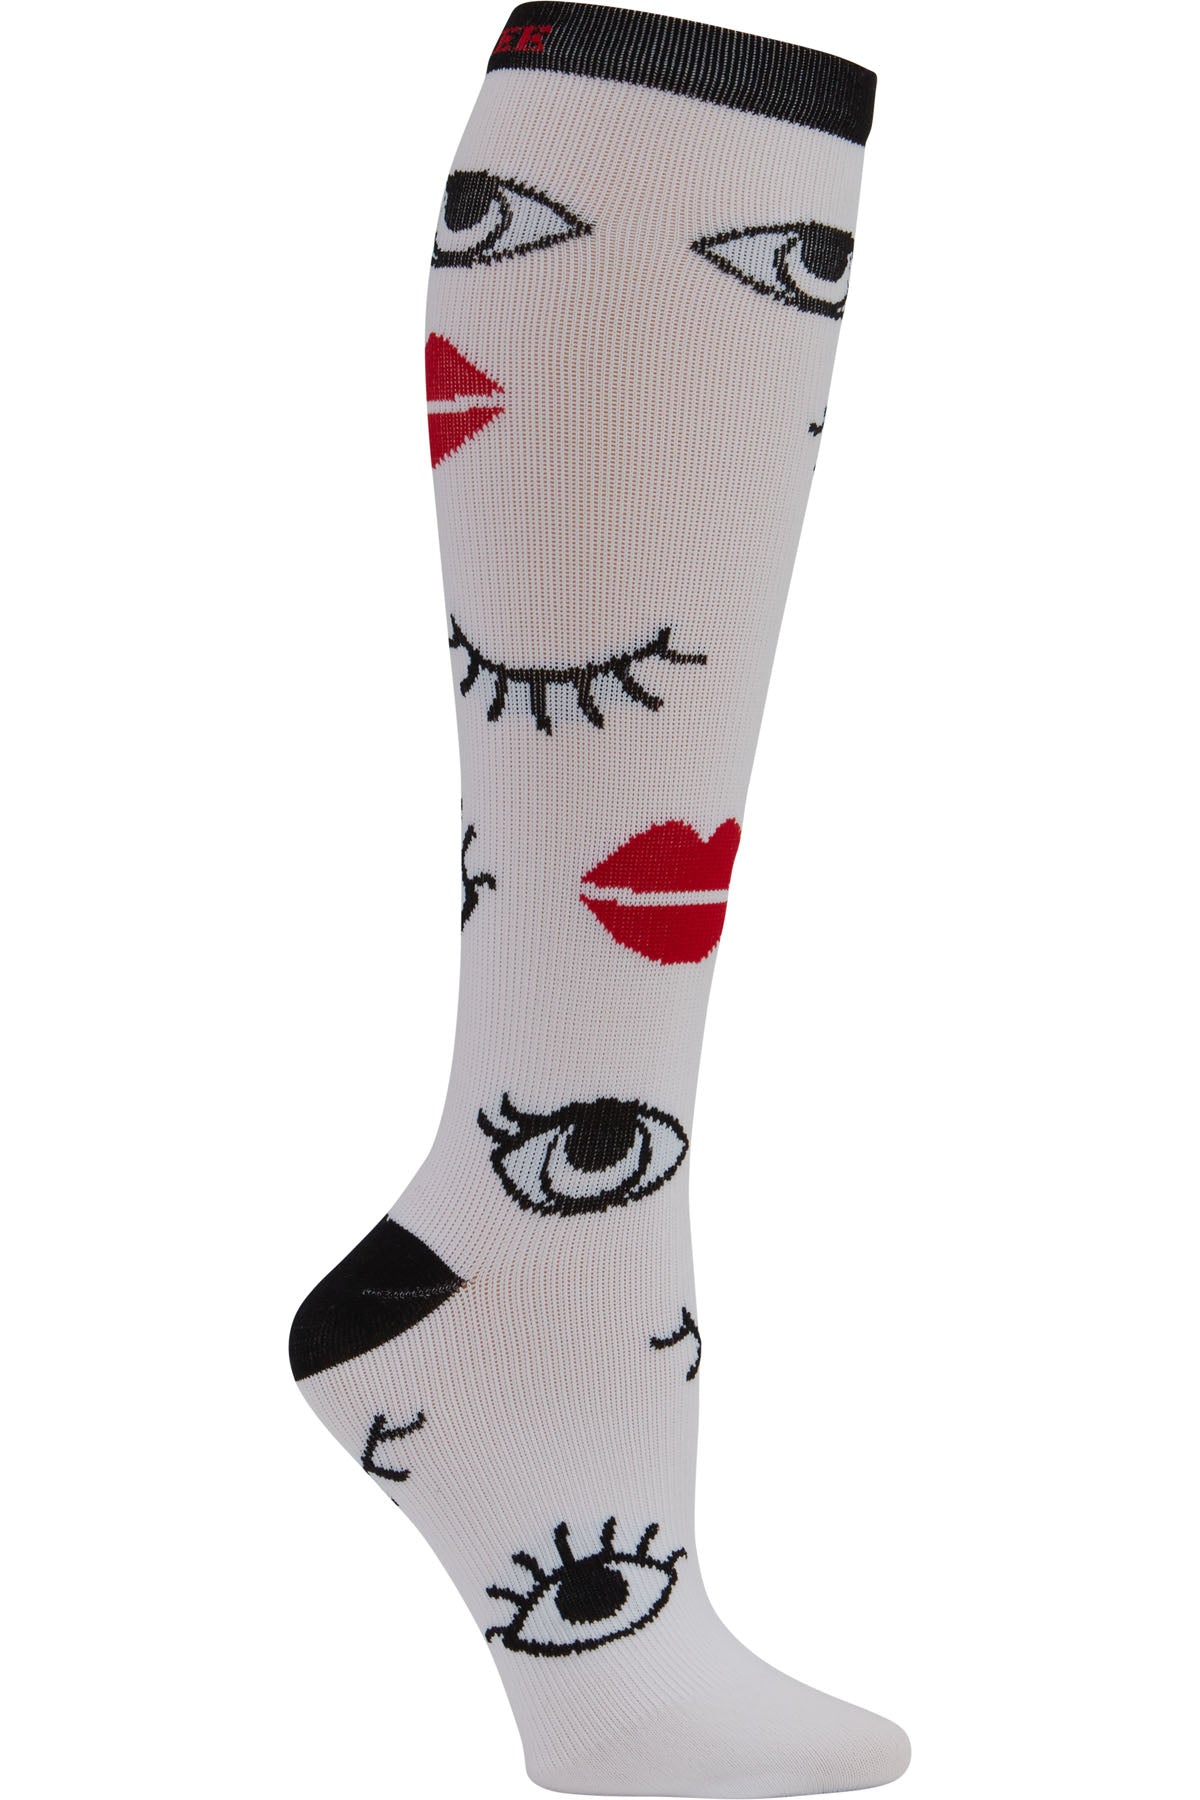 Cherokee Plus Print Support Mild Compression Socks Wide Calf 8-12 mmHg Eye On You at Parker's Clothing and Shoes.